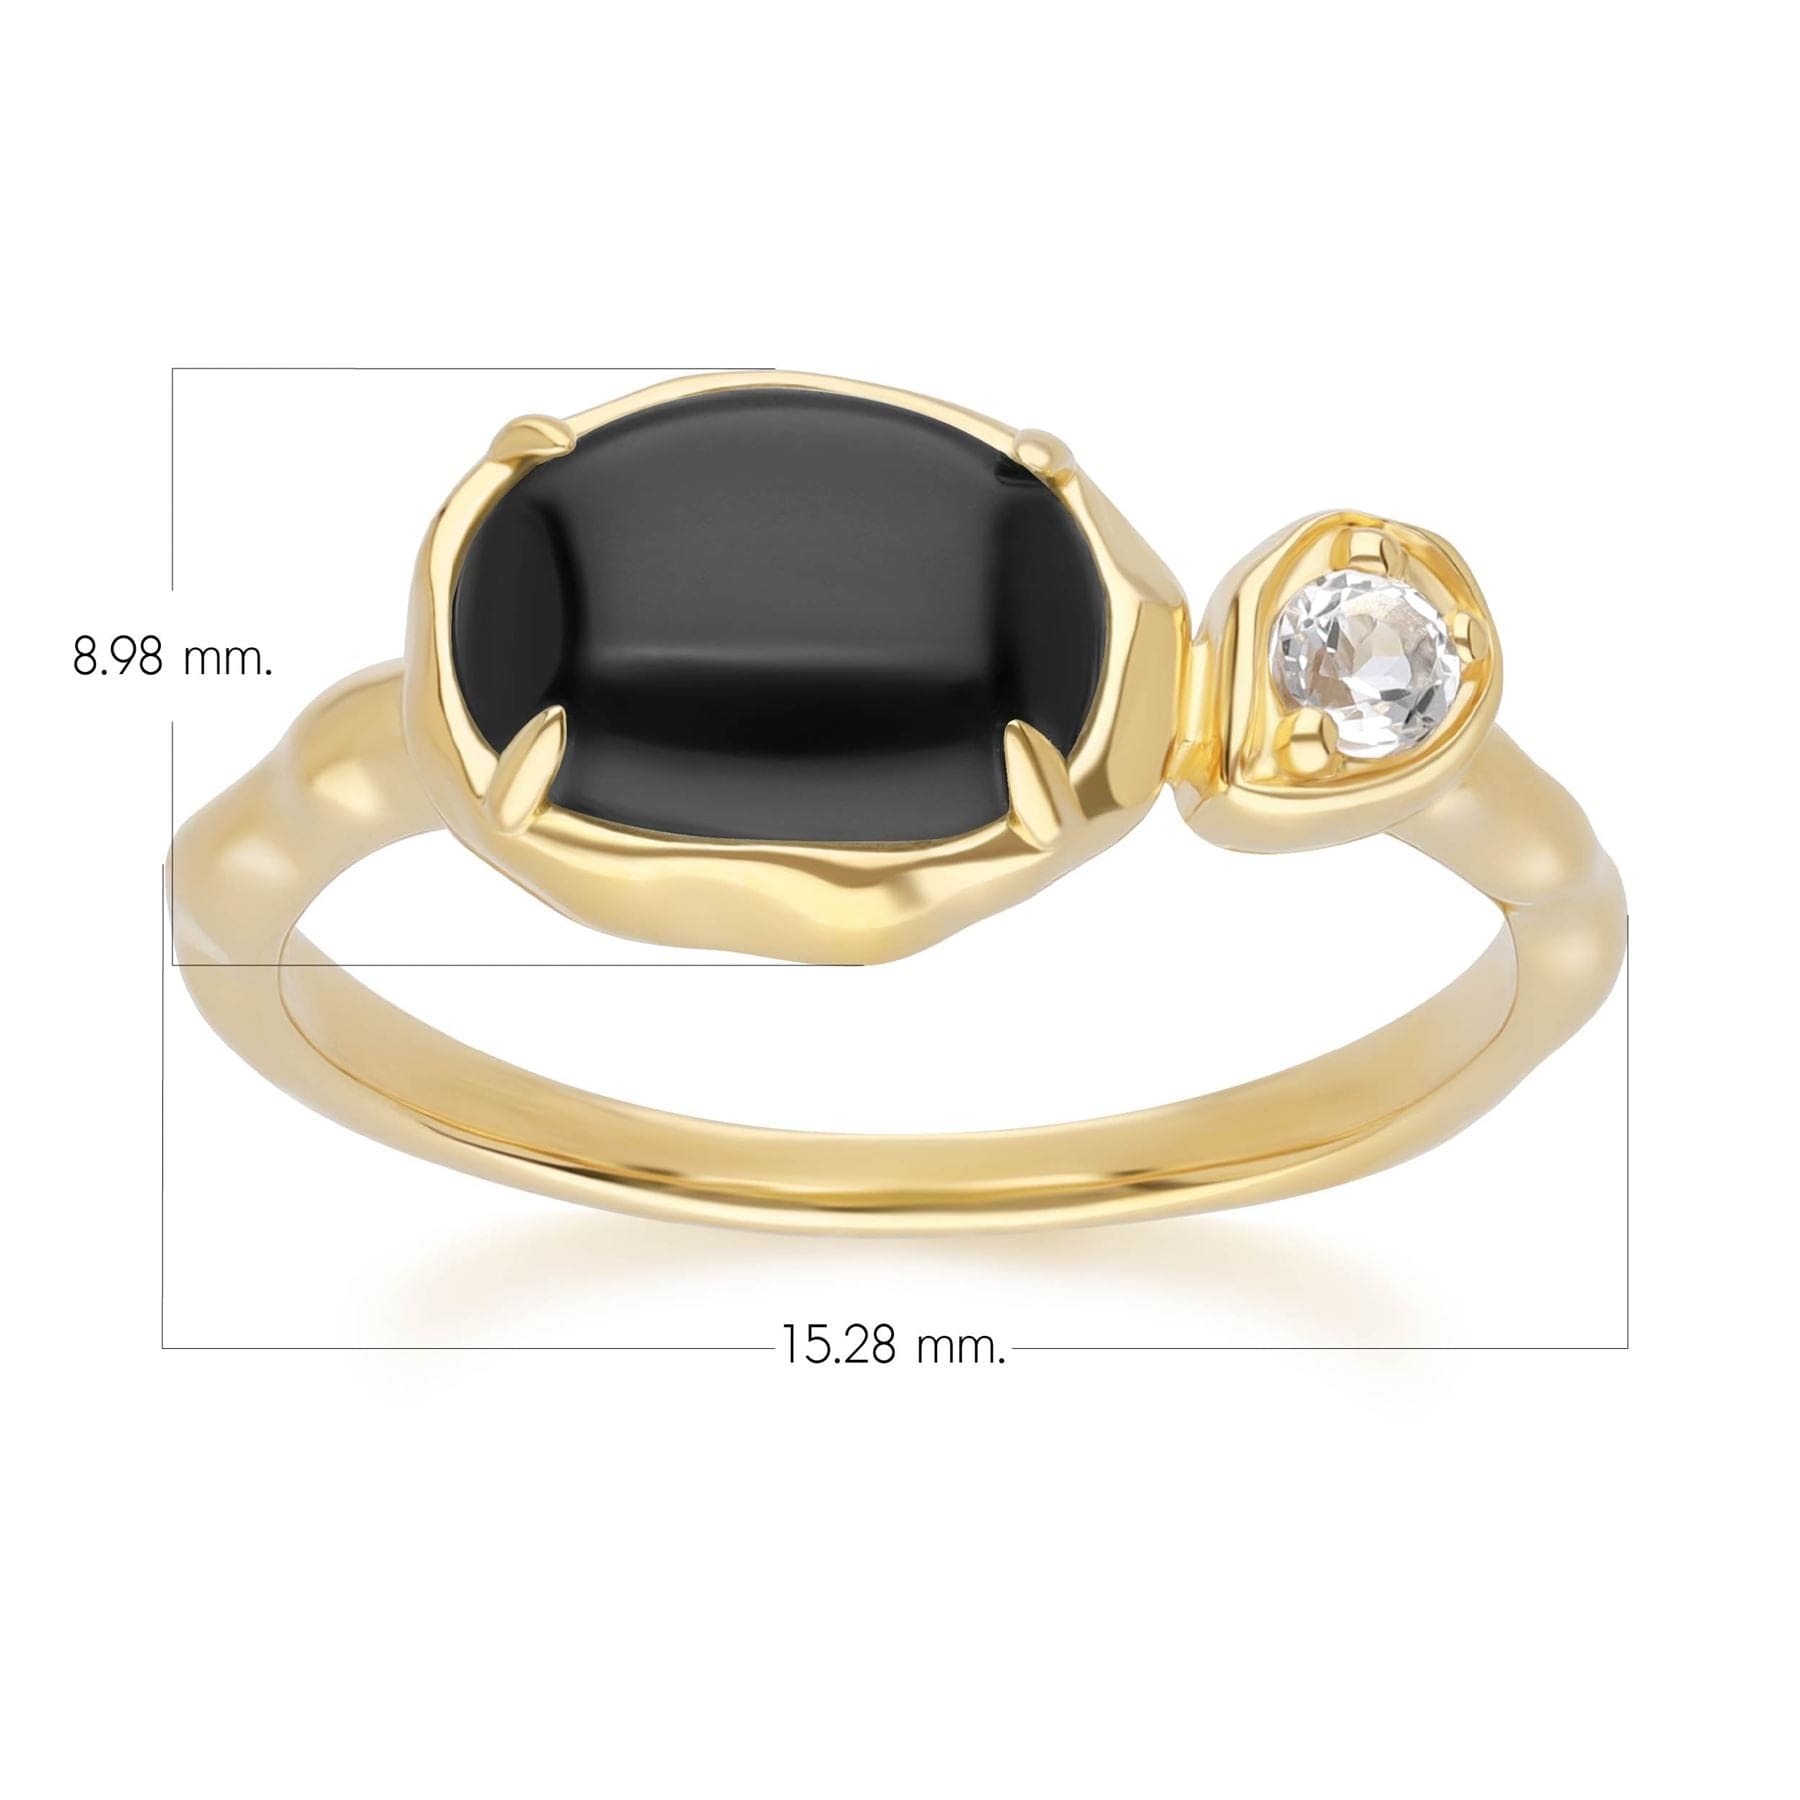 Irregular Oval Black Onyx & Topaz Ring In 18ct Gold Plated SterlIng Silver